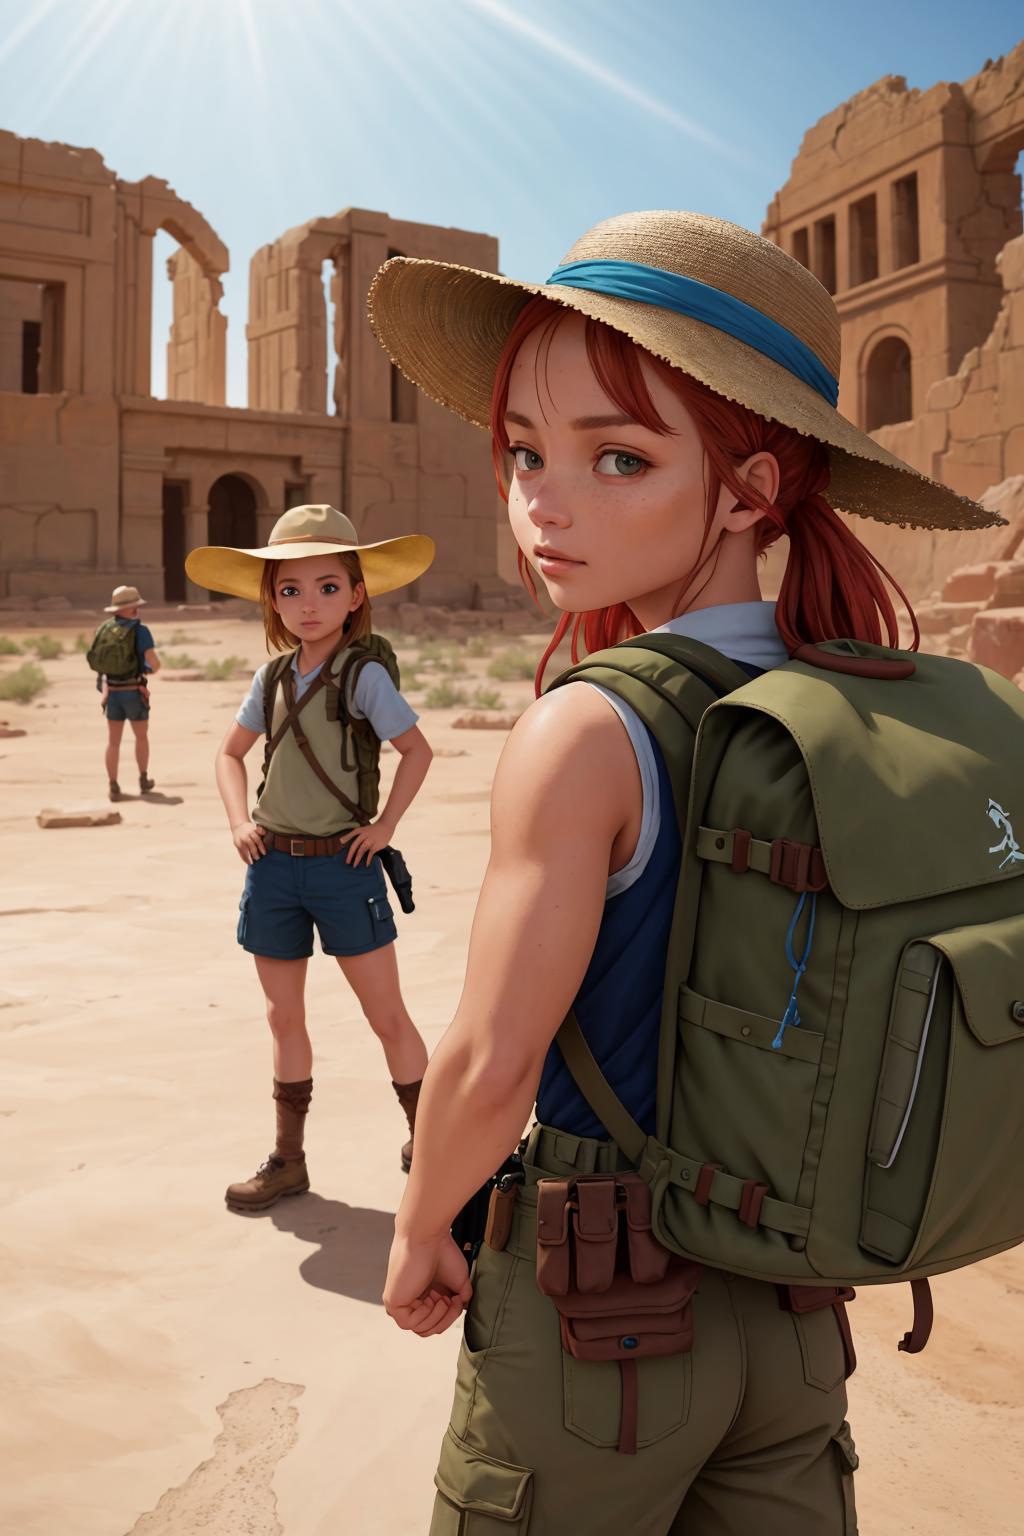 A cartoon image of a girl with a tan hat, a backpack, and a brown hat.